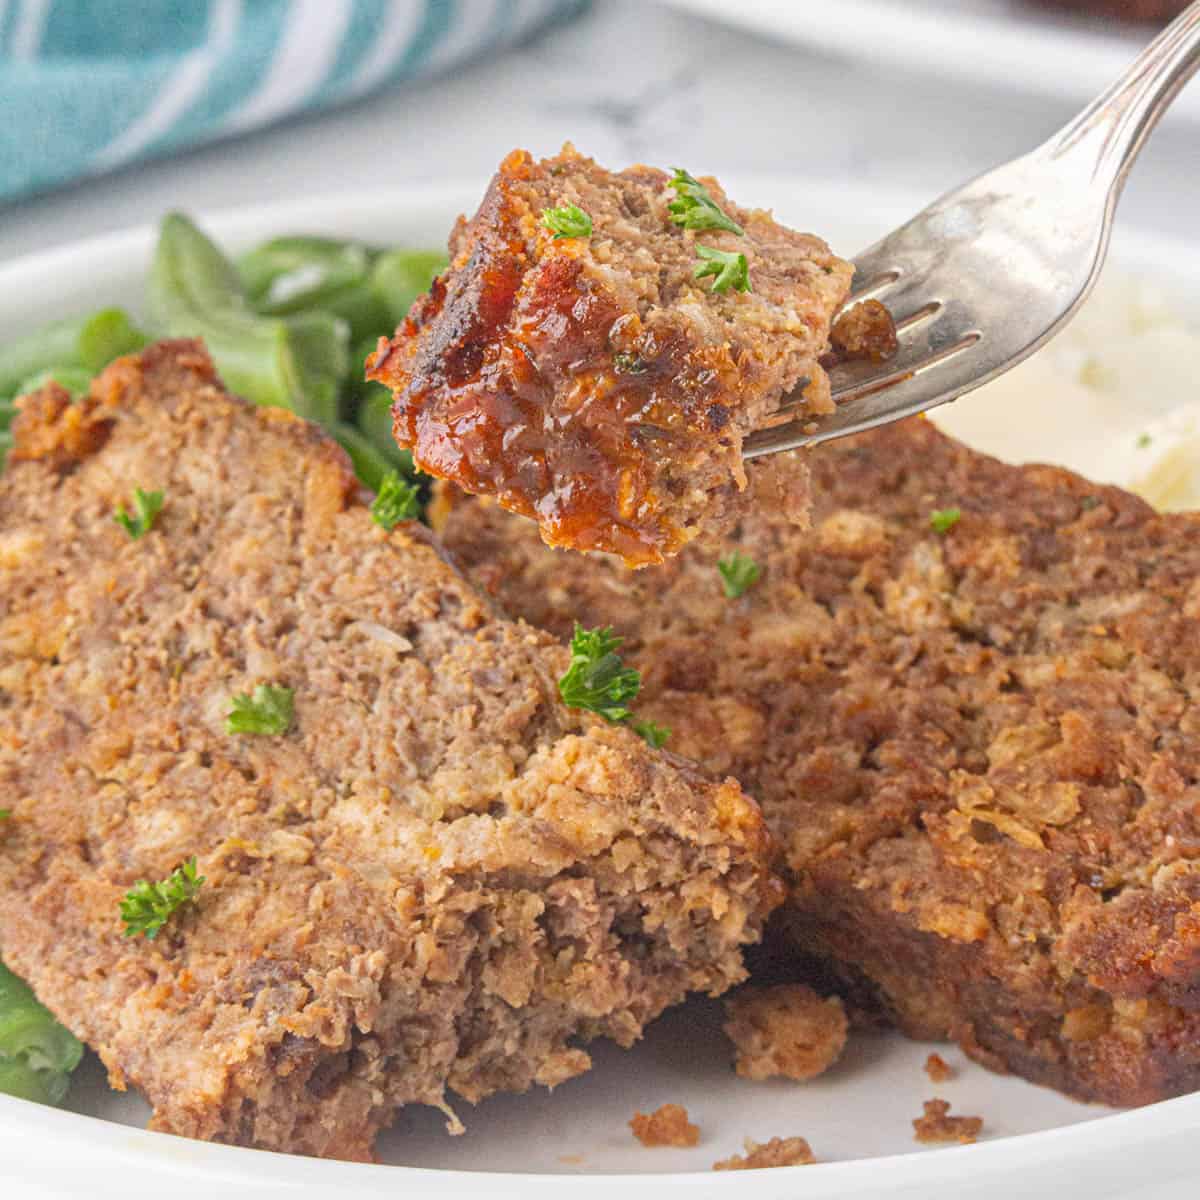 Slices of meatloaf on a plate with a fork stabbing a bite.